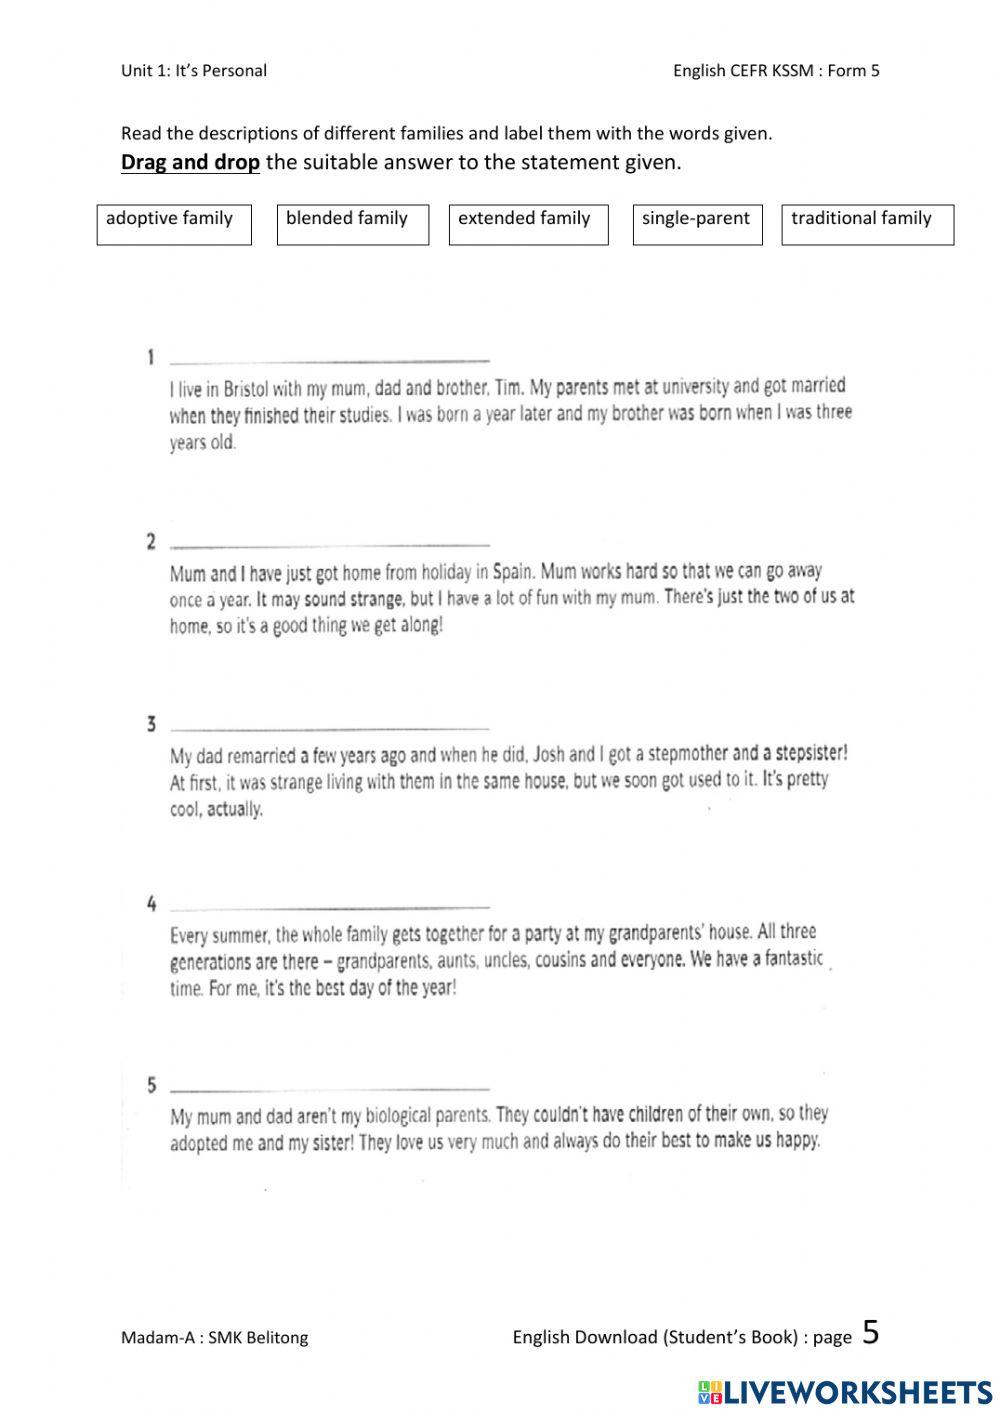 English CEFR Form 5 Unit 1: Page 5